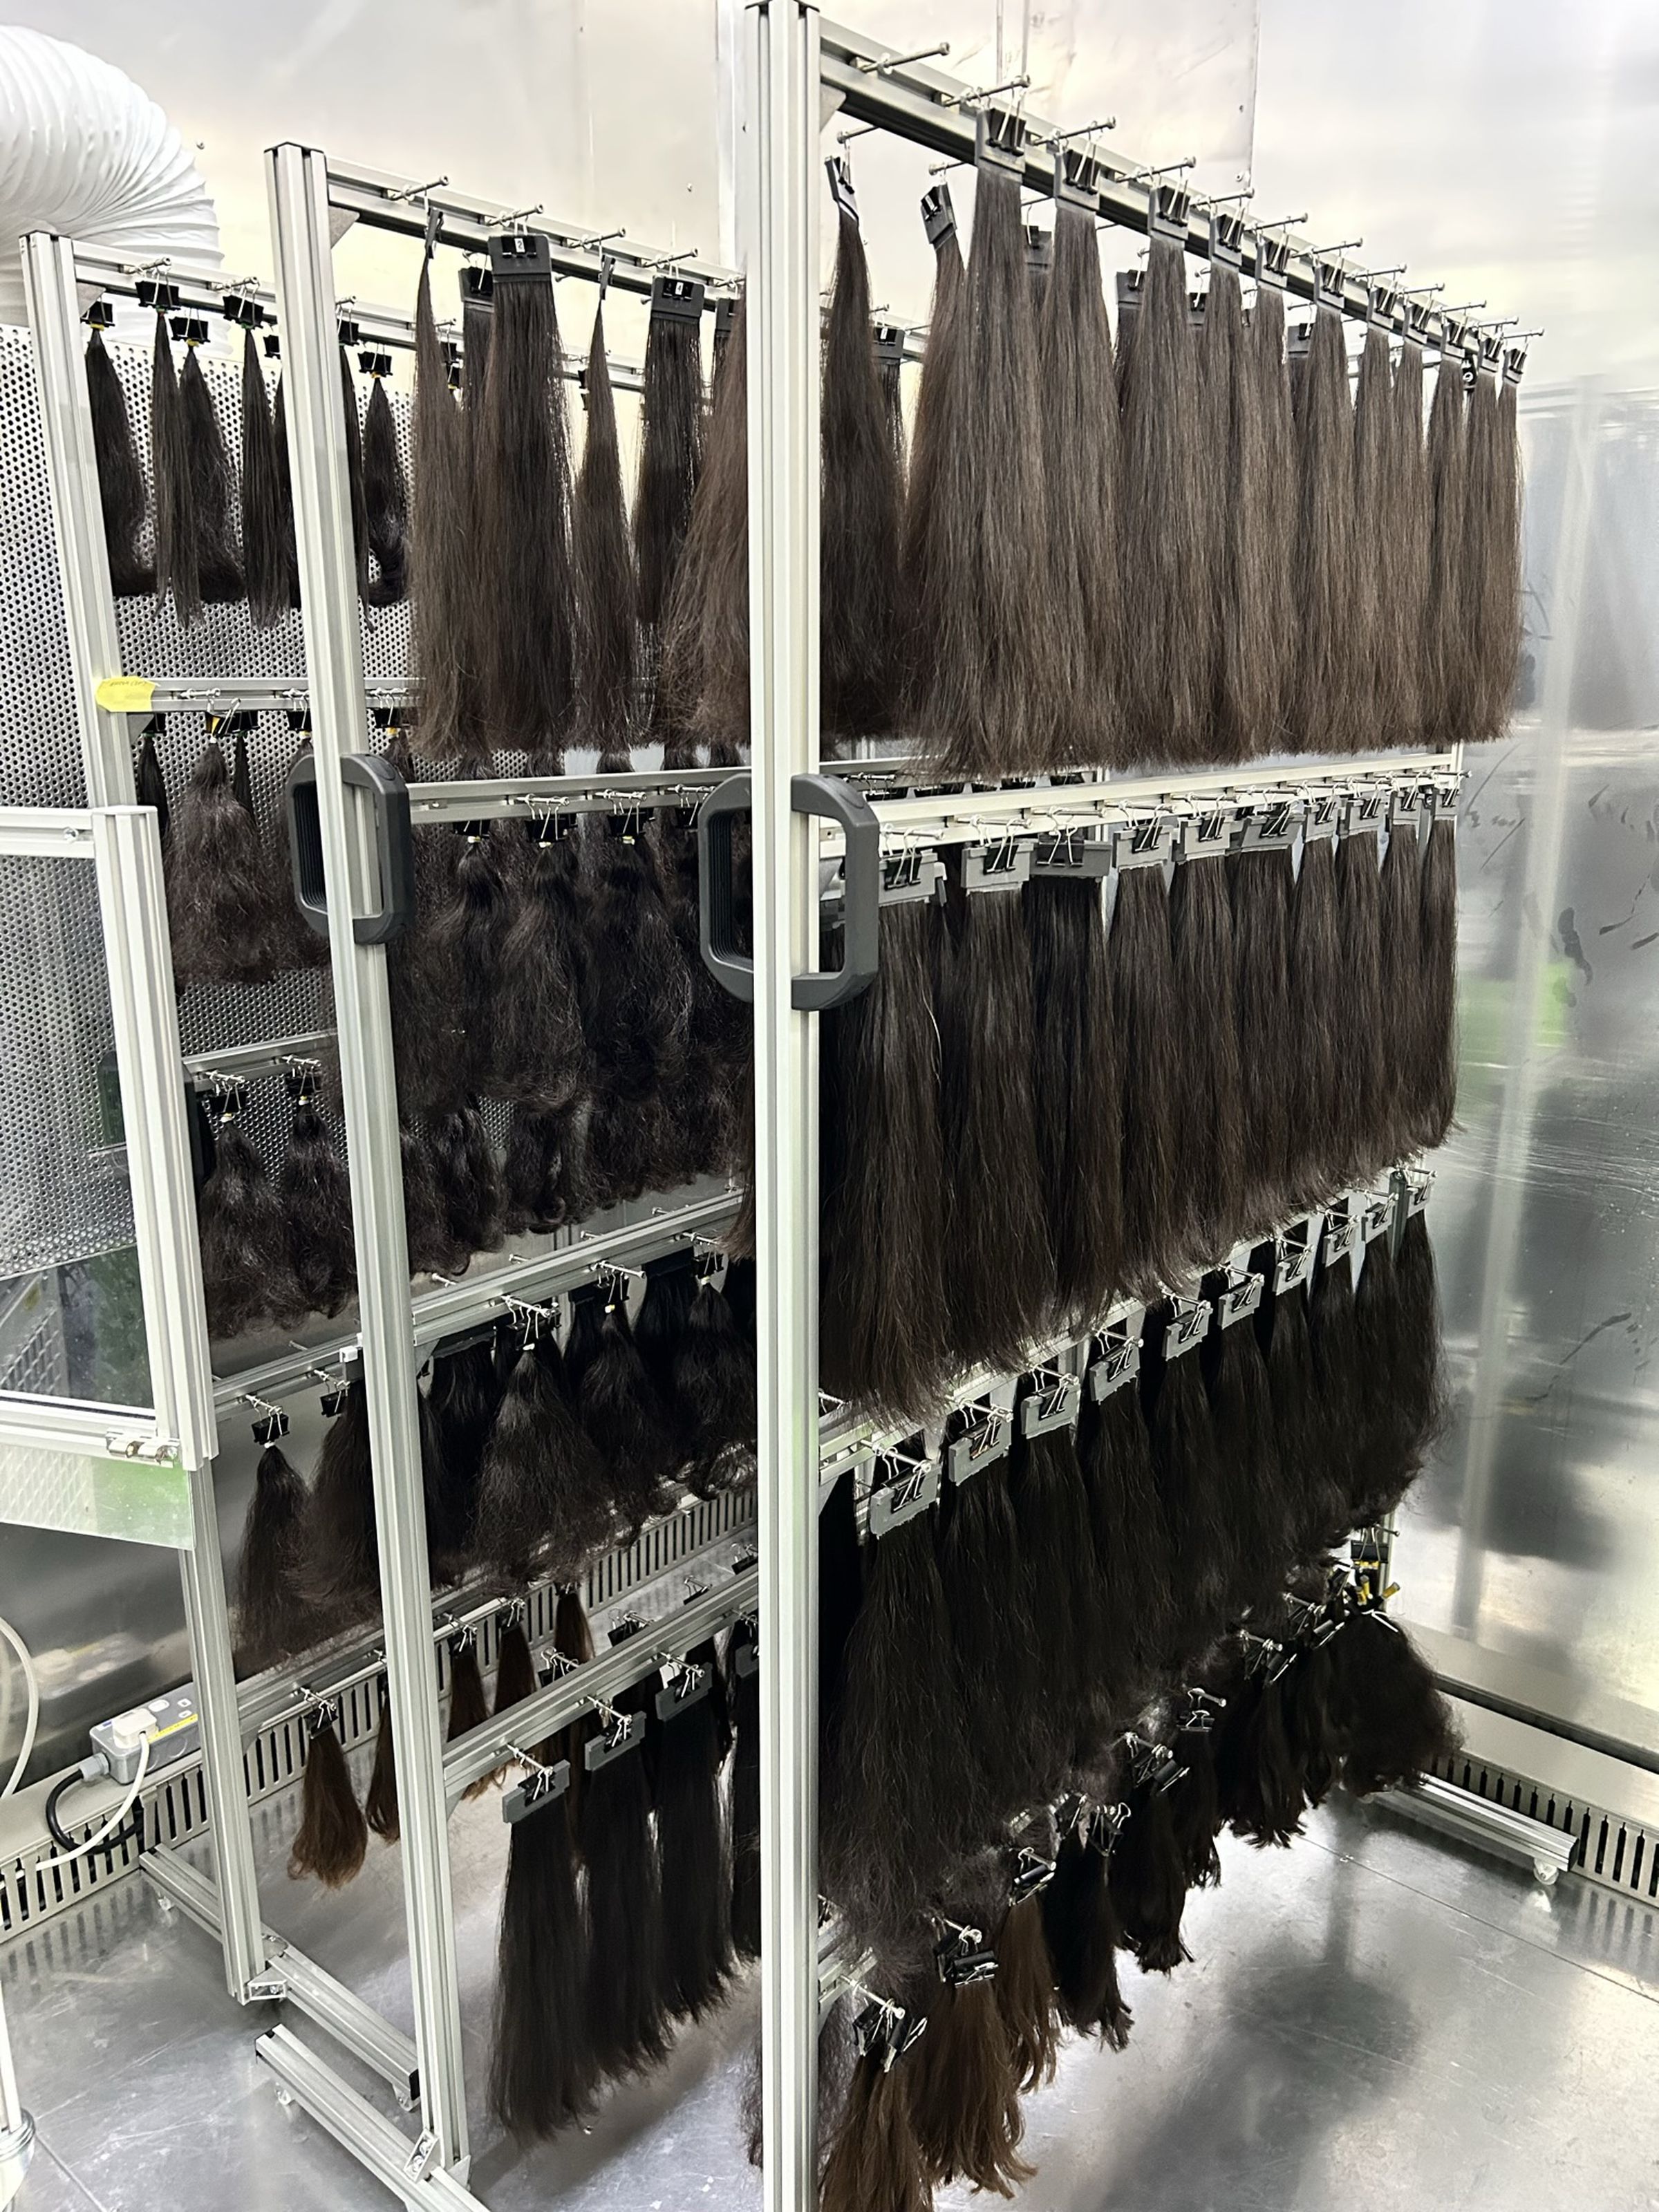 Racks of hair in Dyson’s lab used to test the efficacy of its dryer.